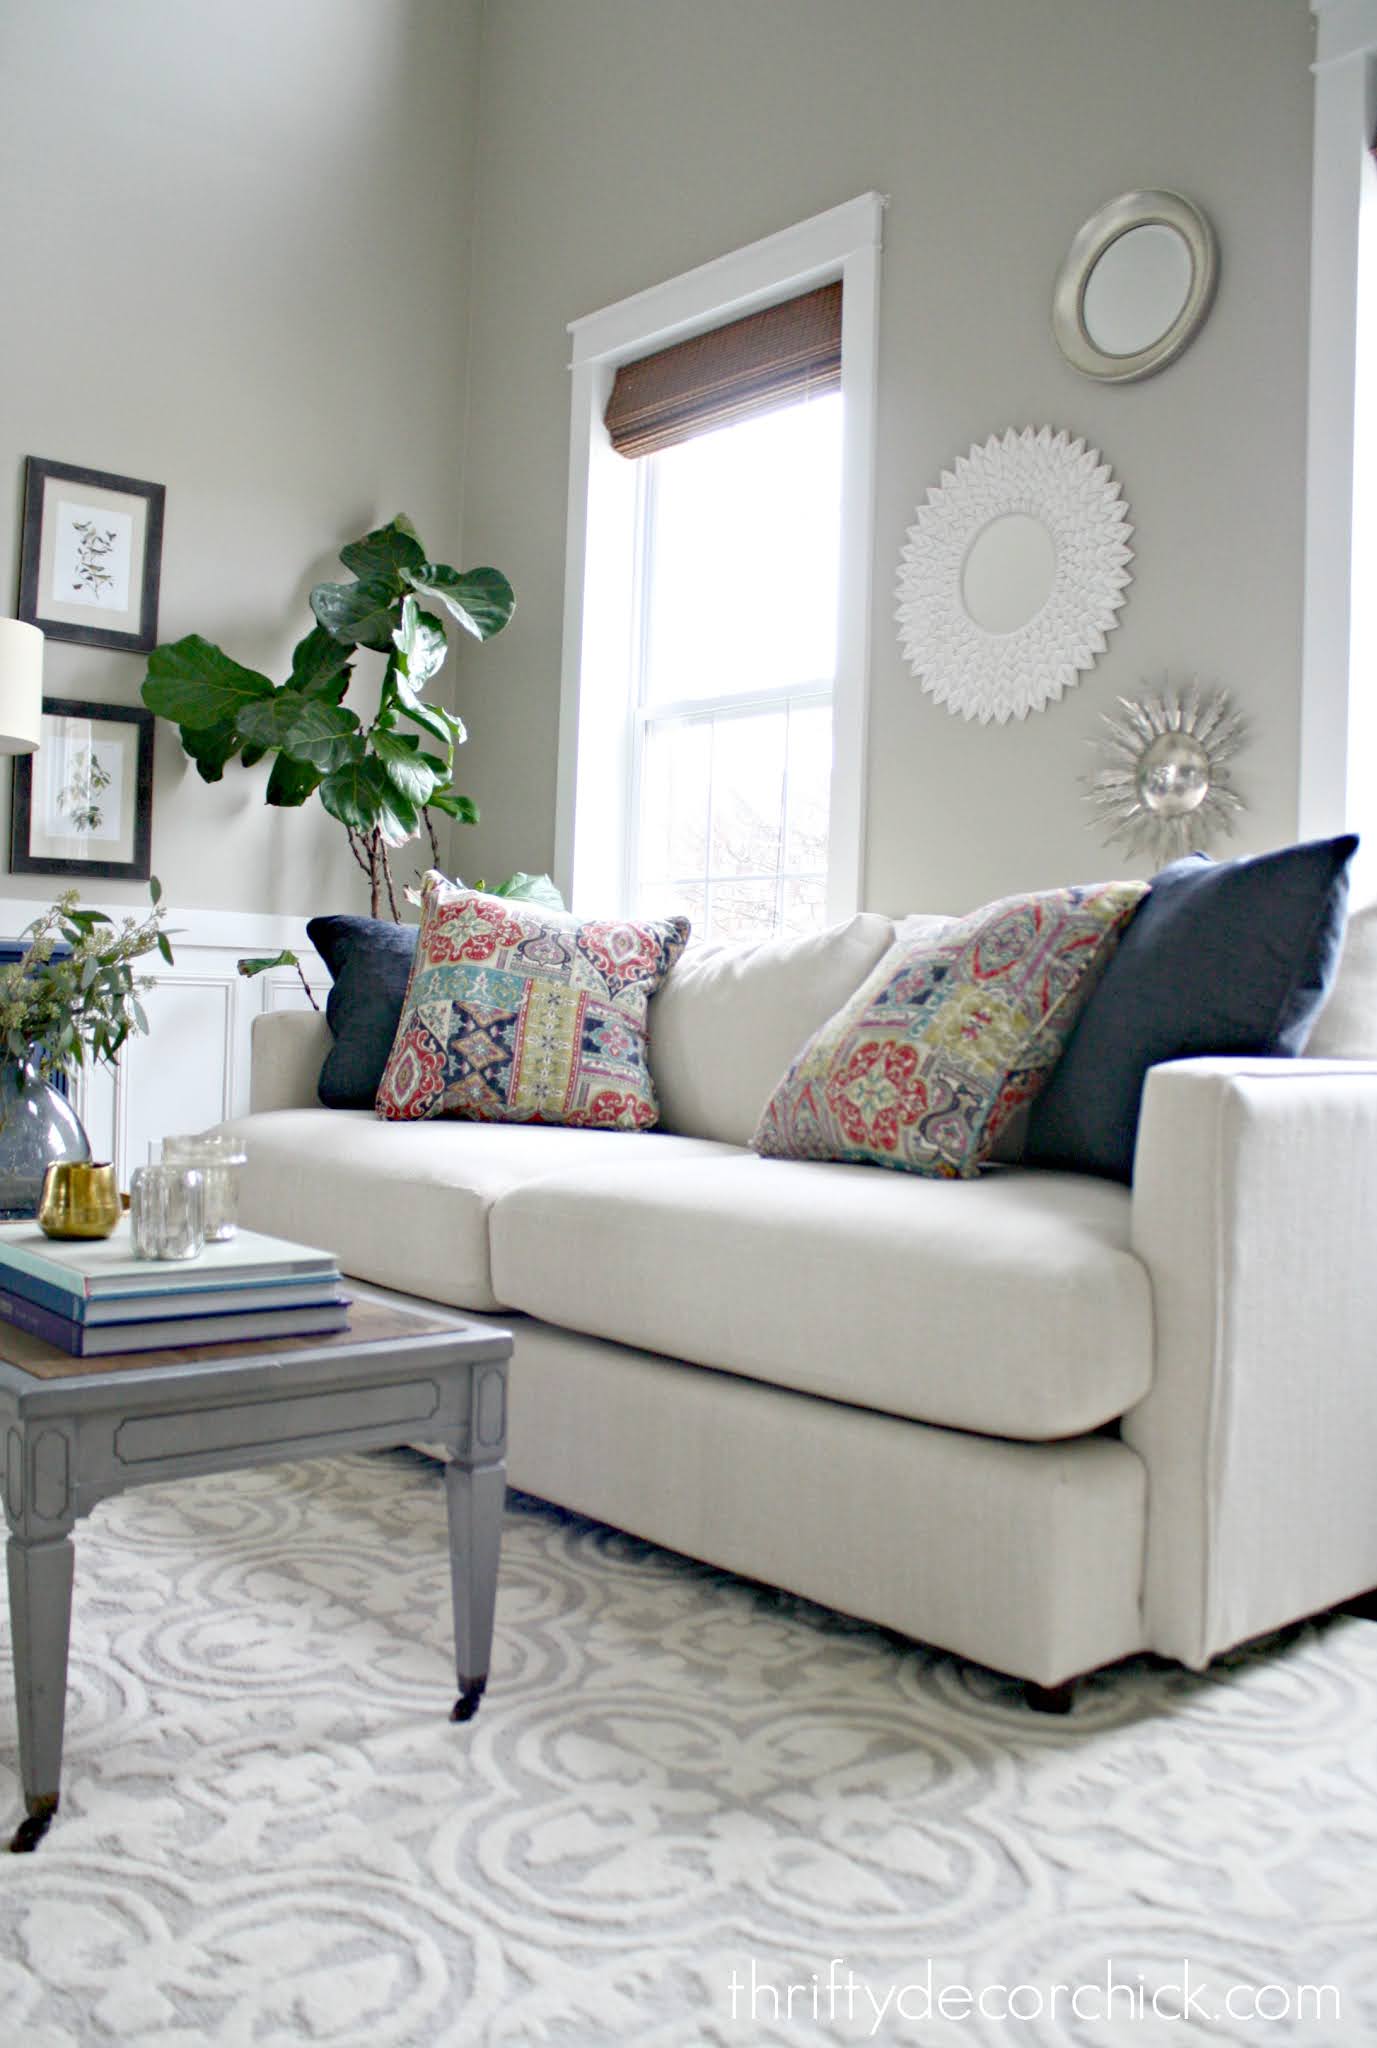 5 Tips to Find The Most Comfortable Couch (Or Sectional!)